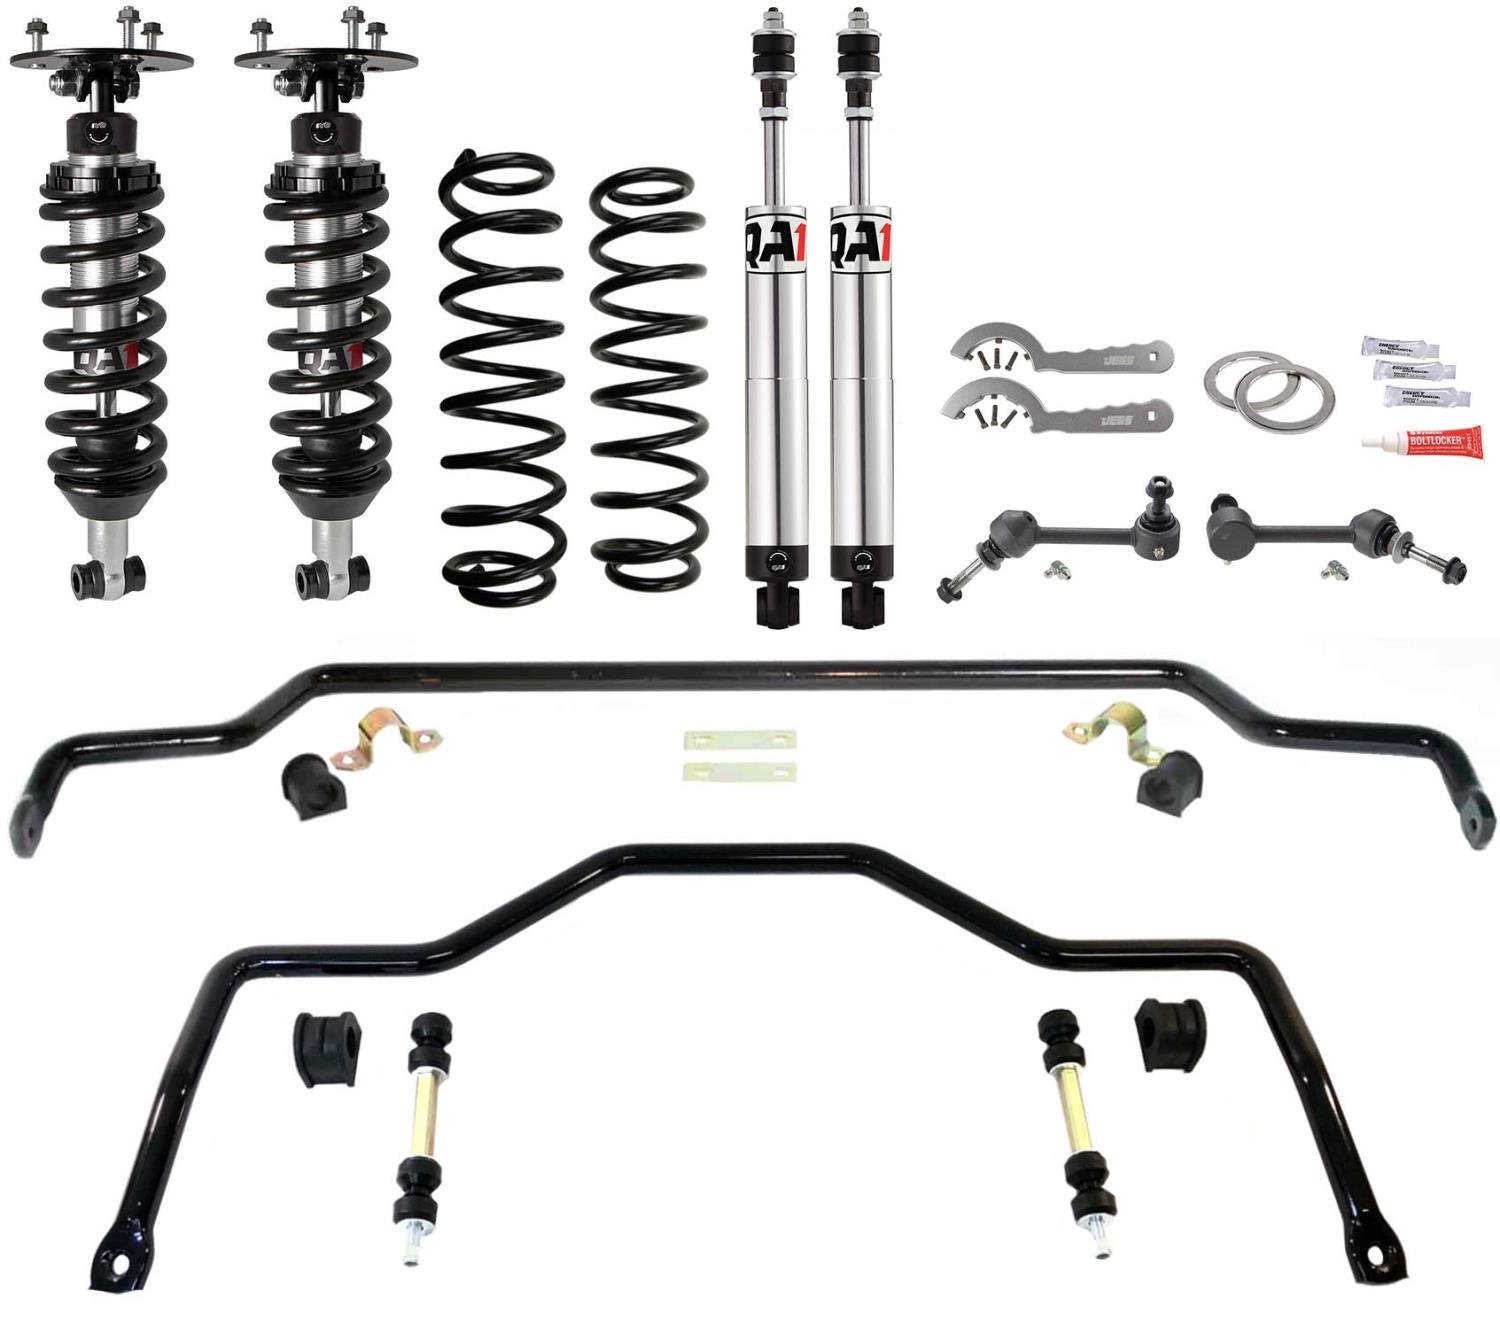 Pro Coil Coil-Over Handling Kit 2003-2011 Ford Crown Victoria, Ride Height: 0-2 in. Front Lowered, 2 in. Rear Lowered